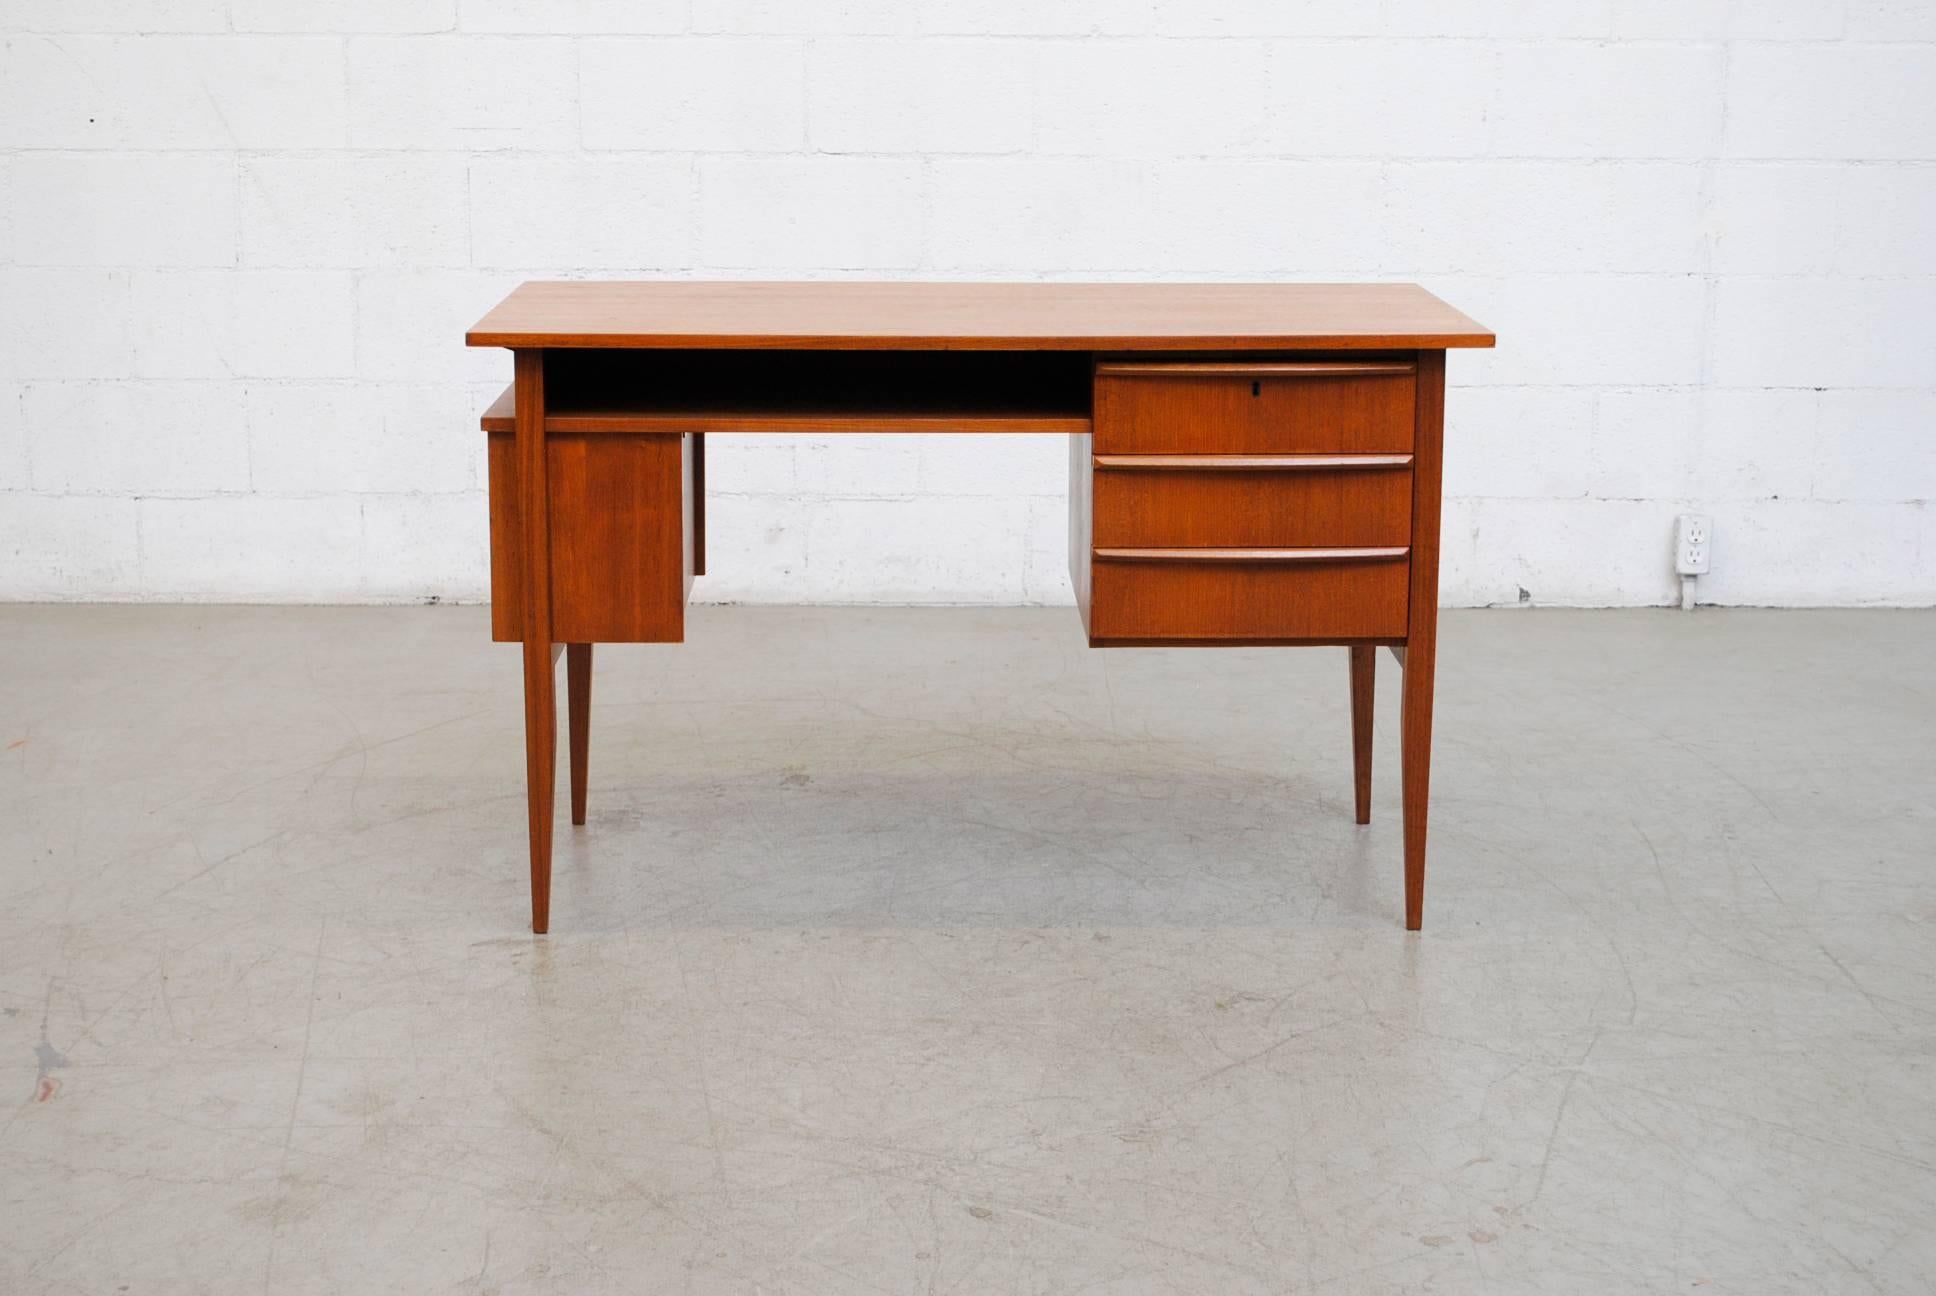 Beautiful Mid-Century teak desk. Three drawers on the right hand side with key lock and side bookshelf. Center cubby hole for storage and tapered legs. Good Original Condiiton.